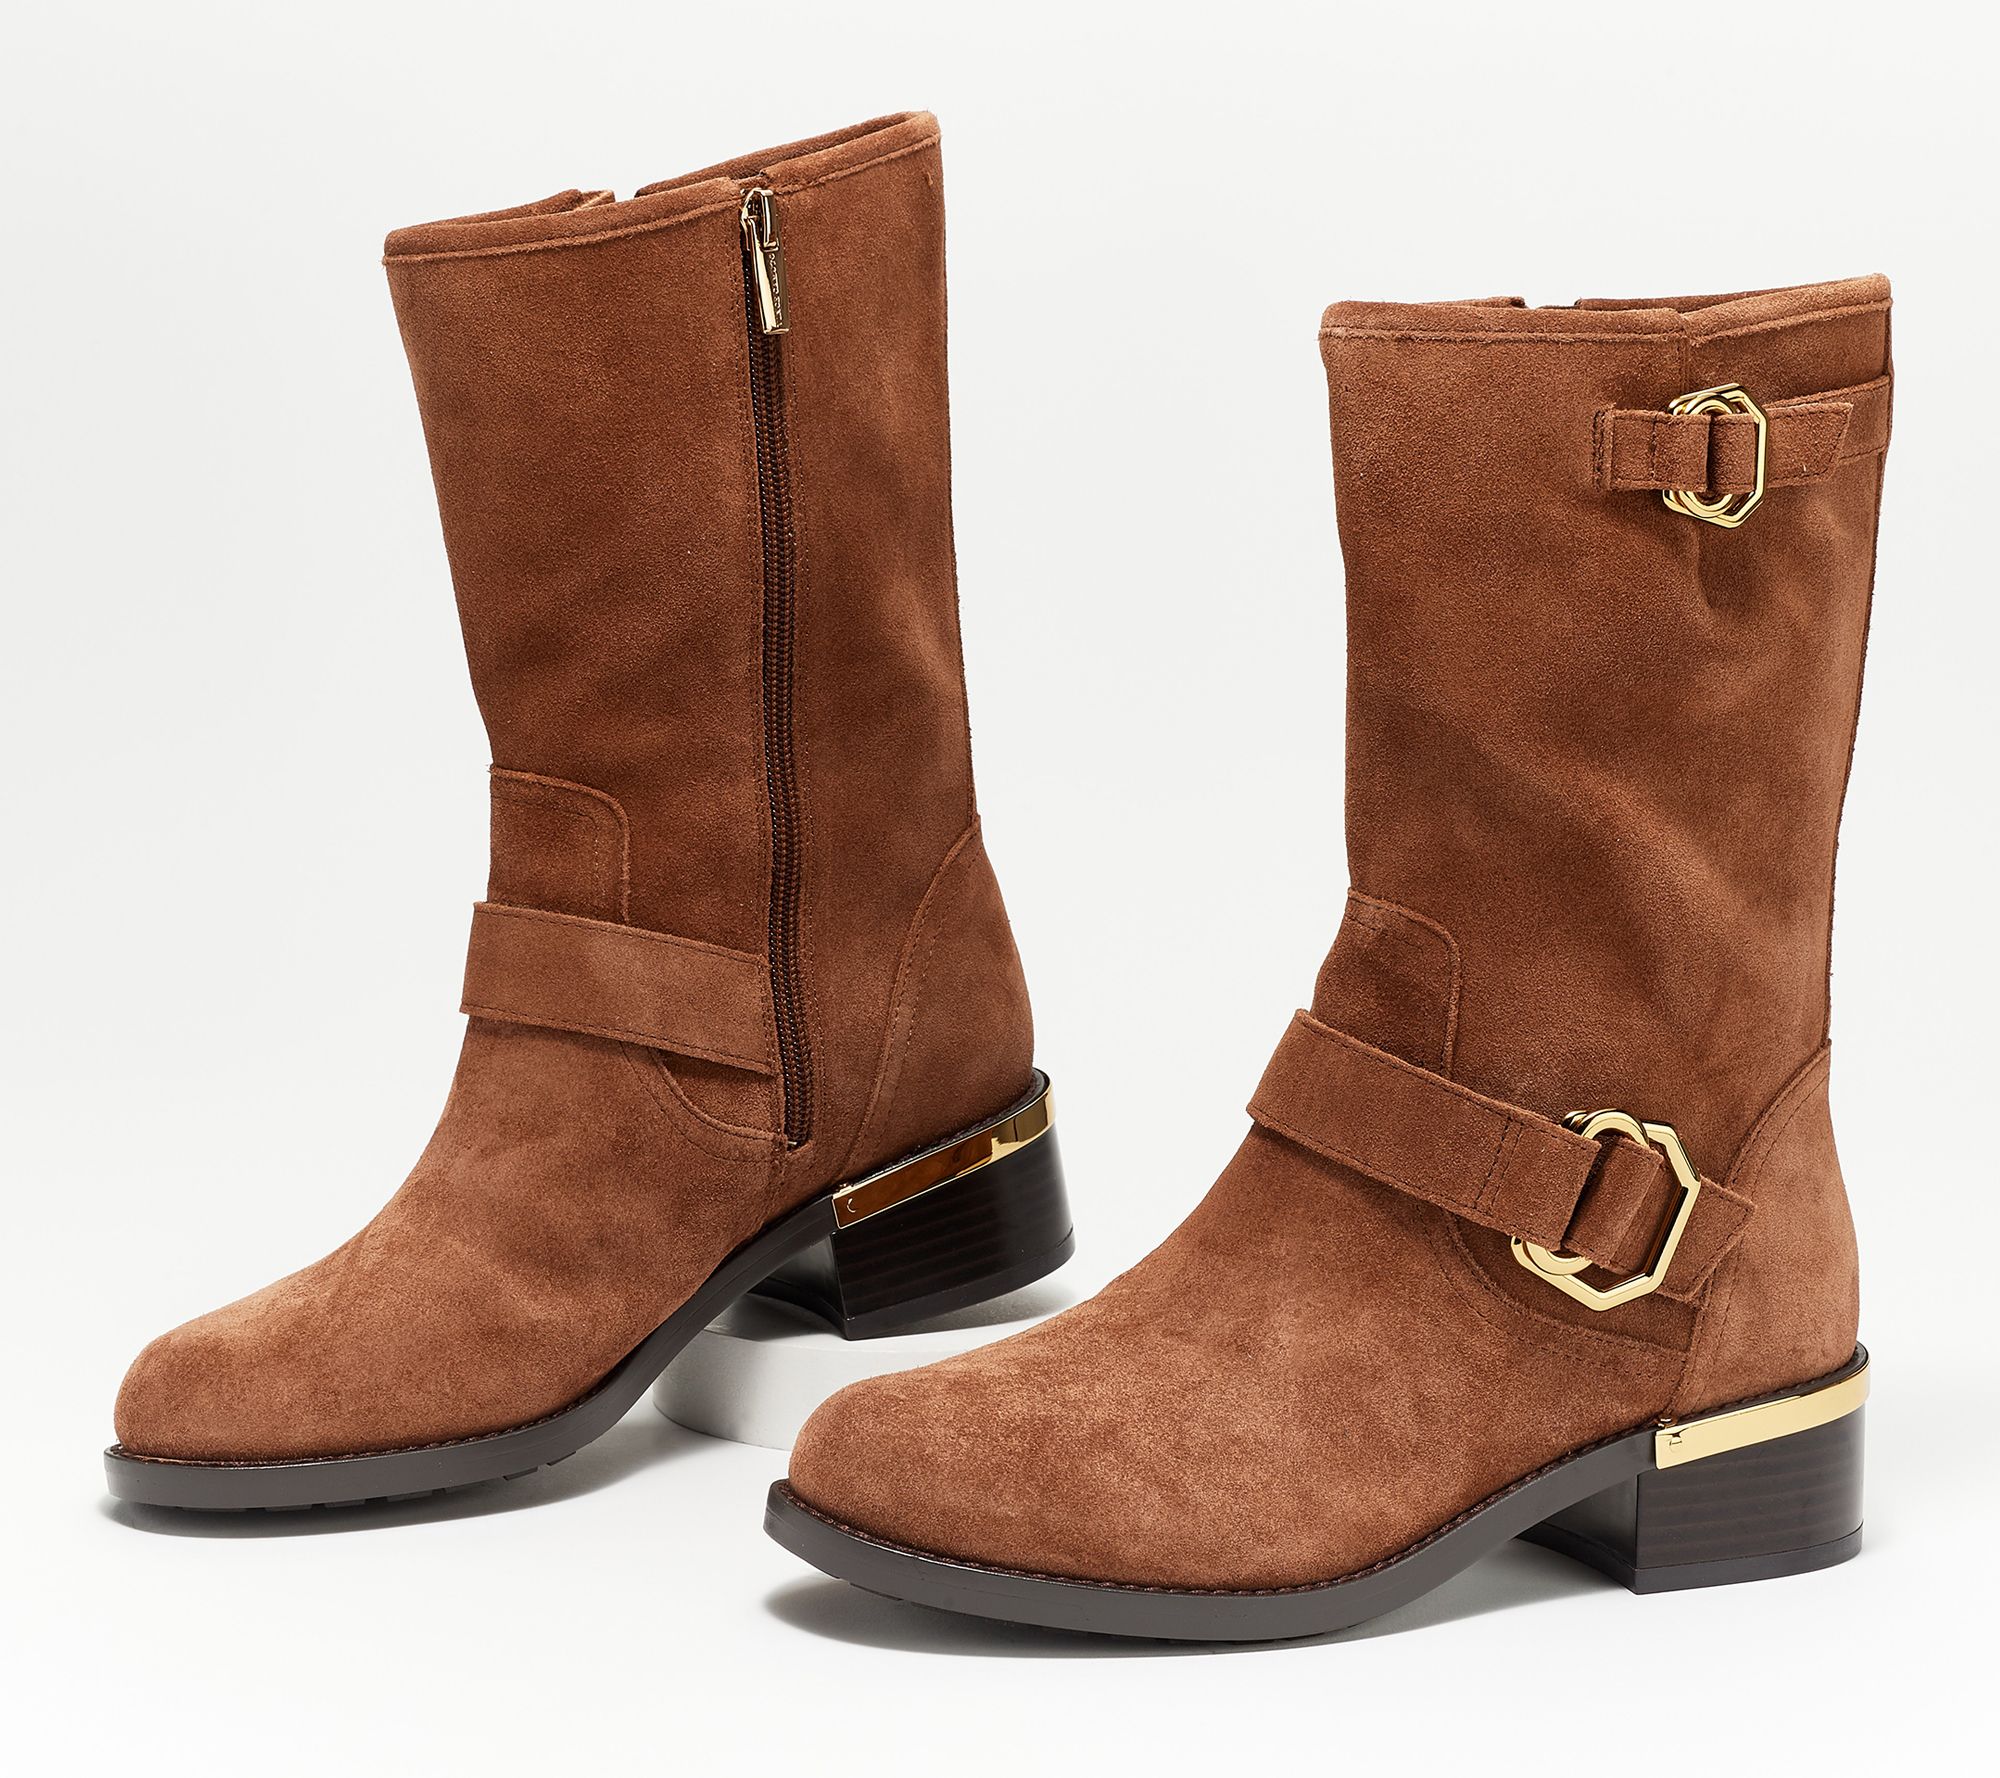 Vince Camuto Leather or Suede Mid Calf Boots- Wadelyn - QVC.com